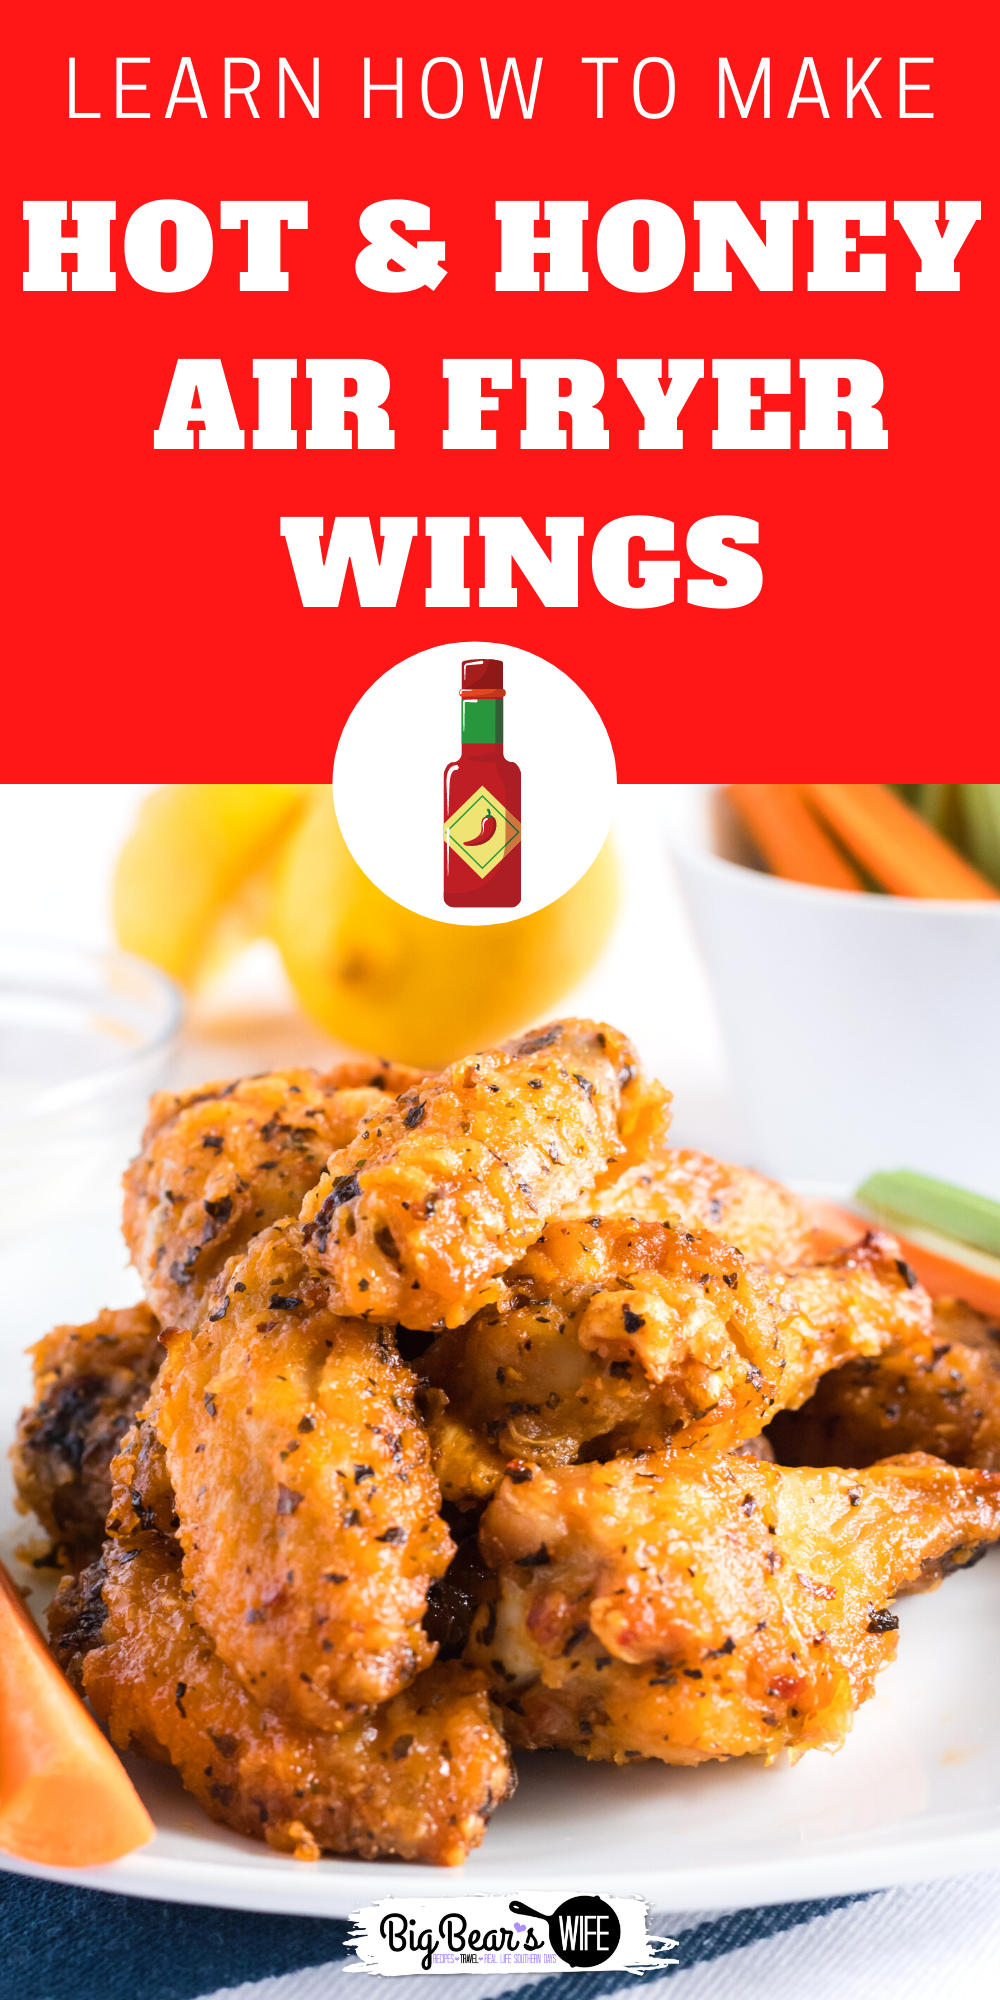 Chicken wings and air fryers are the perfect combination! These Hot Honey Air Fryer Wings cook up in about 30 minutes and are coated in a homemade hot honey sauce! Perfect for lunch, dinner or as an appetizer for game day! via @bigbearswife